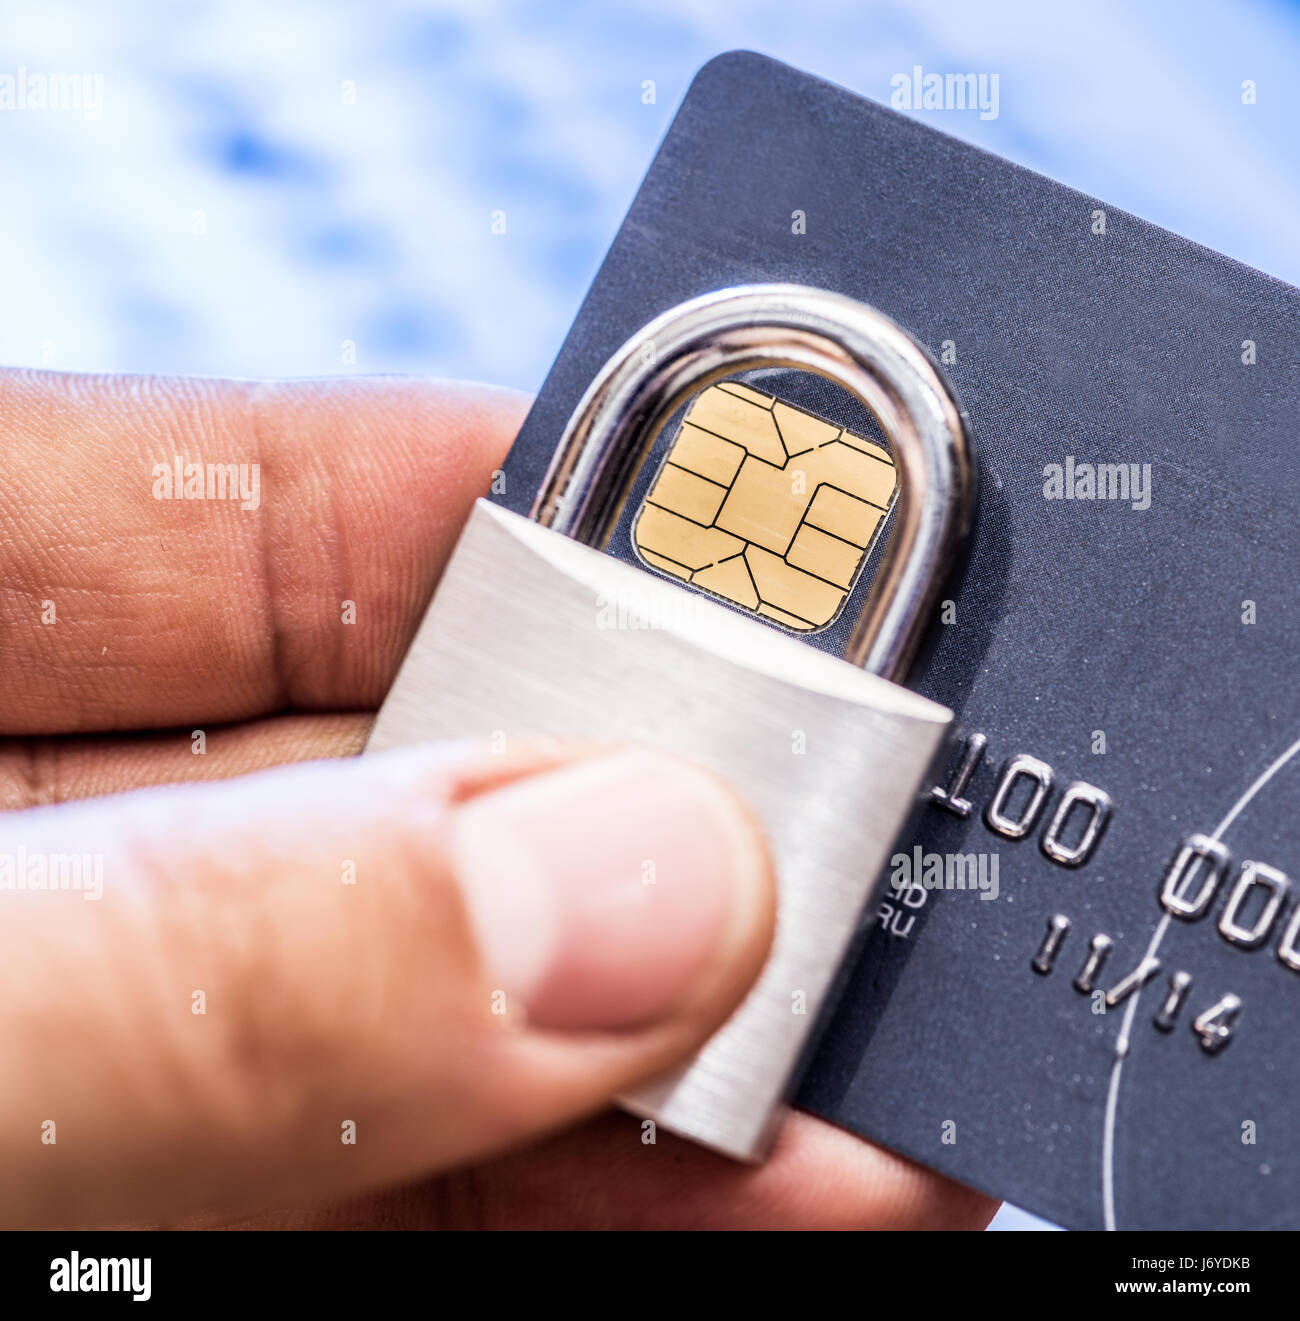 Credit cards and simle mechanical lock. Security concept. Stock Photo